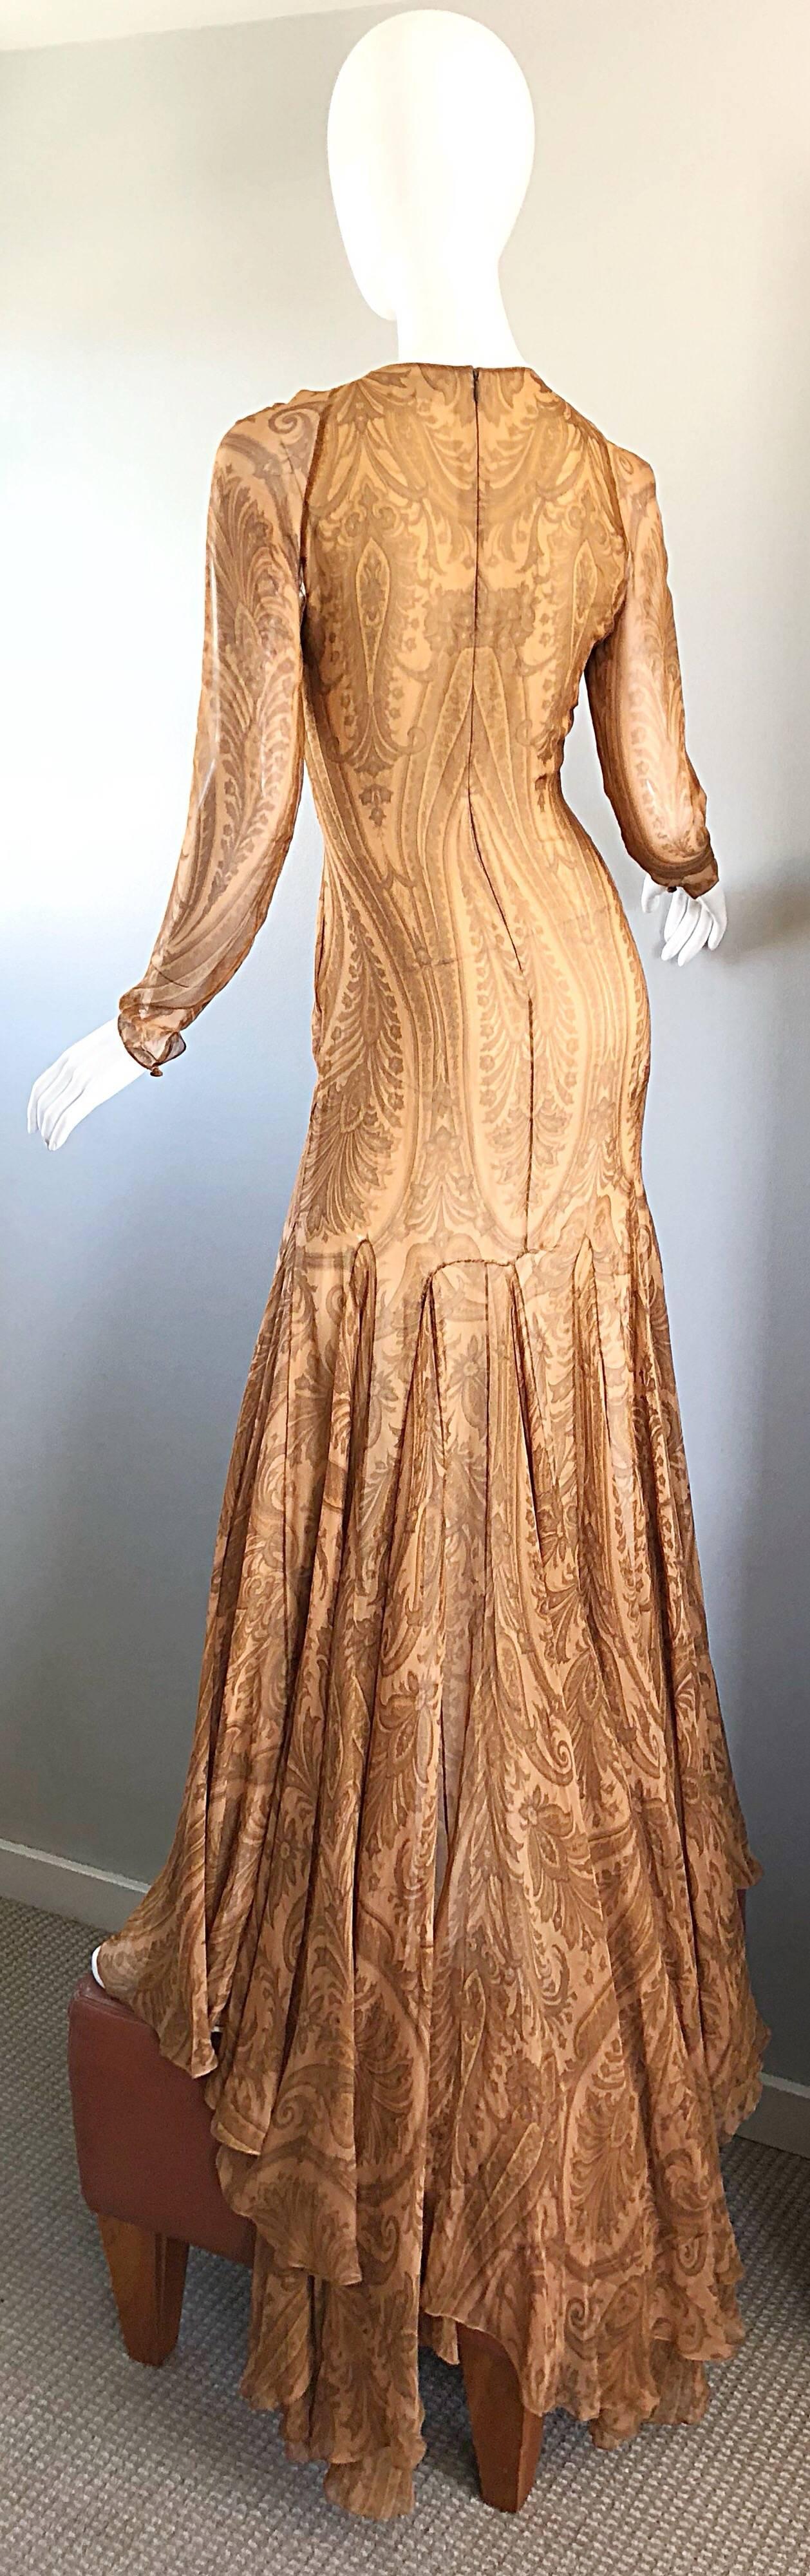 Sensational 1990s Bill Blass Couture Nude Silk Chiffon Paisley Vintage 90s Gown  For Sale 6